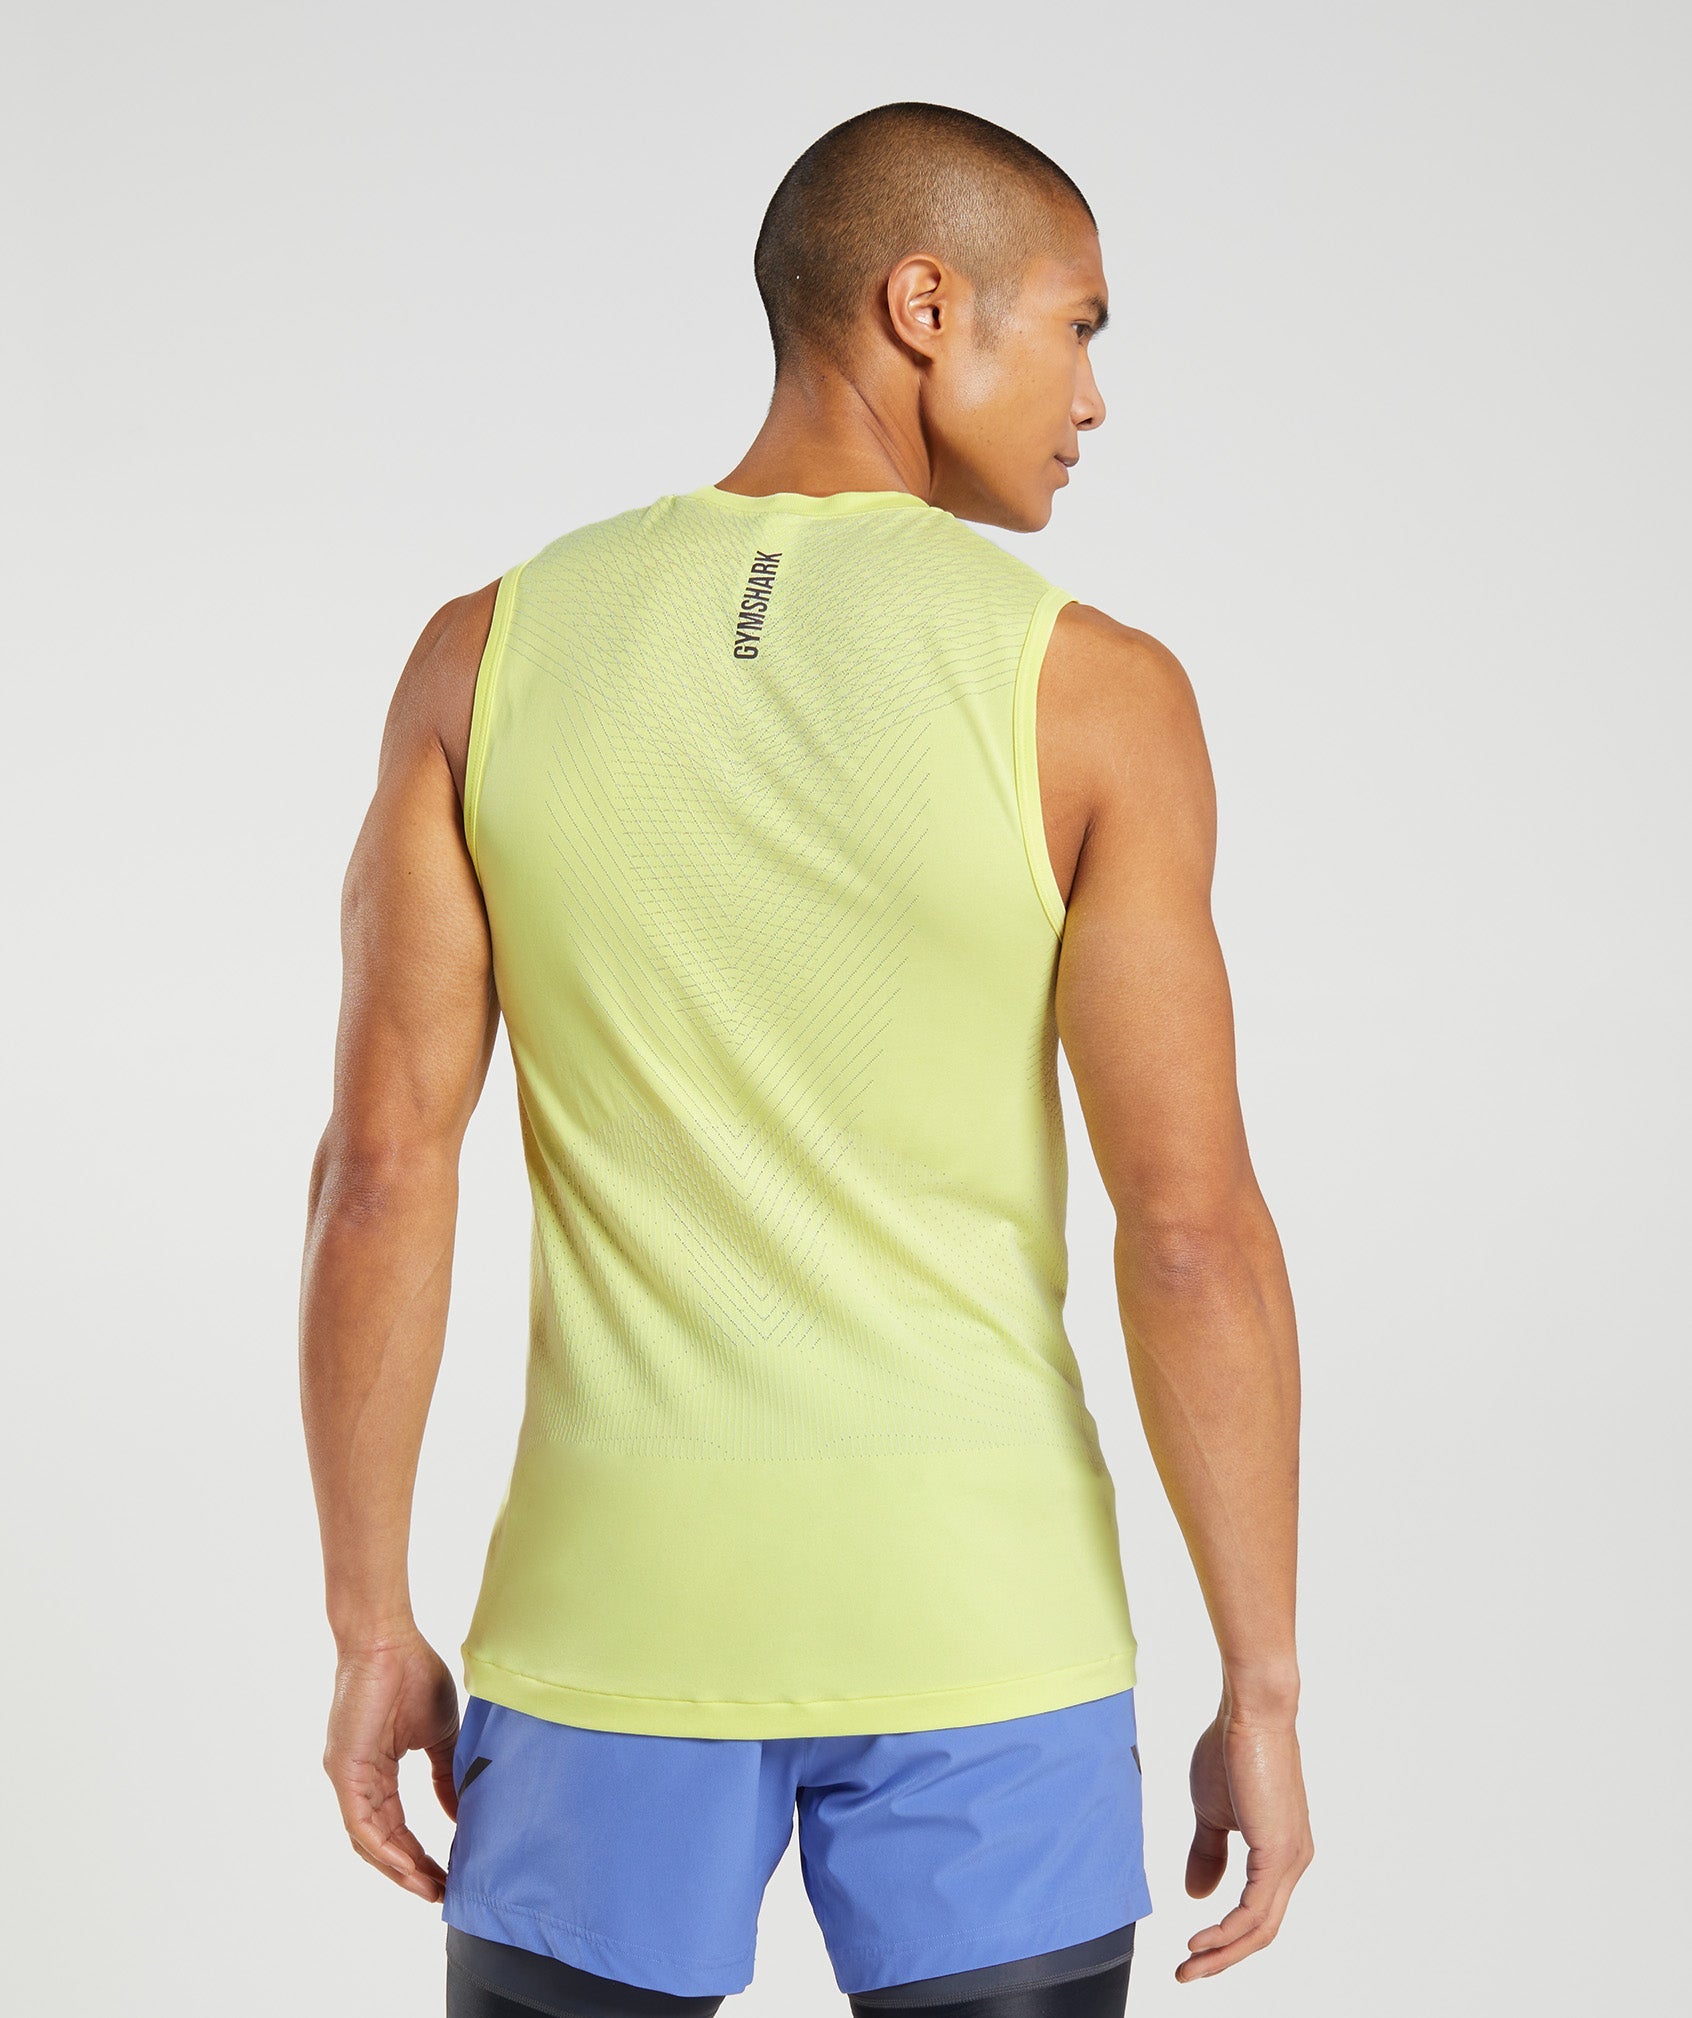 Apex Seamless Tank in Firefly Green/White - view 2